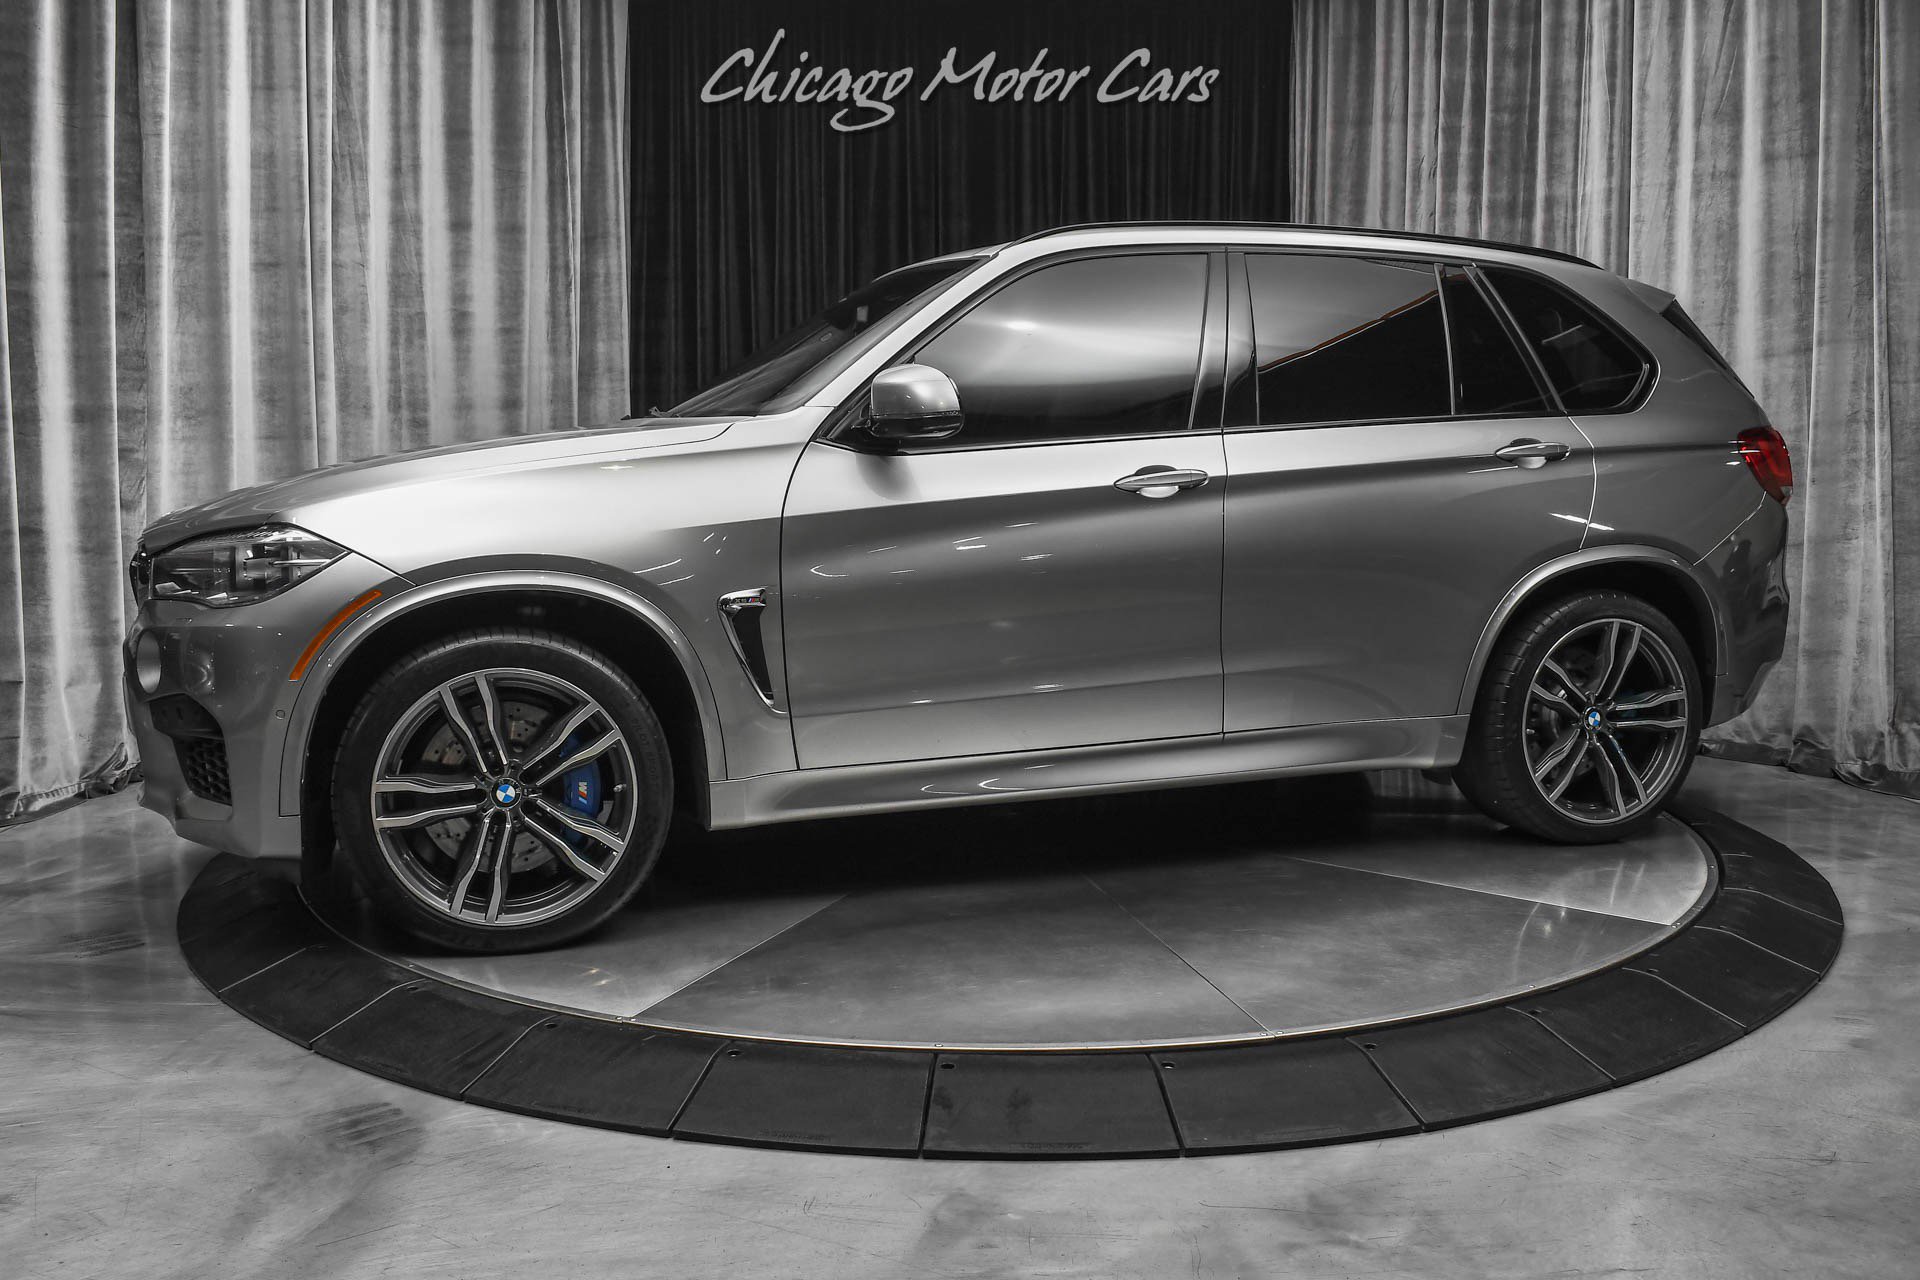 Used 2018 BMW X5 M for Sale Right Now - Autotrader